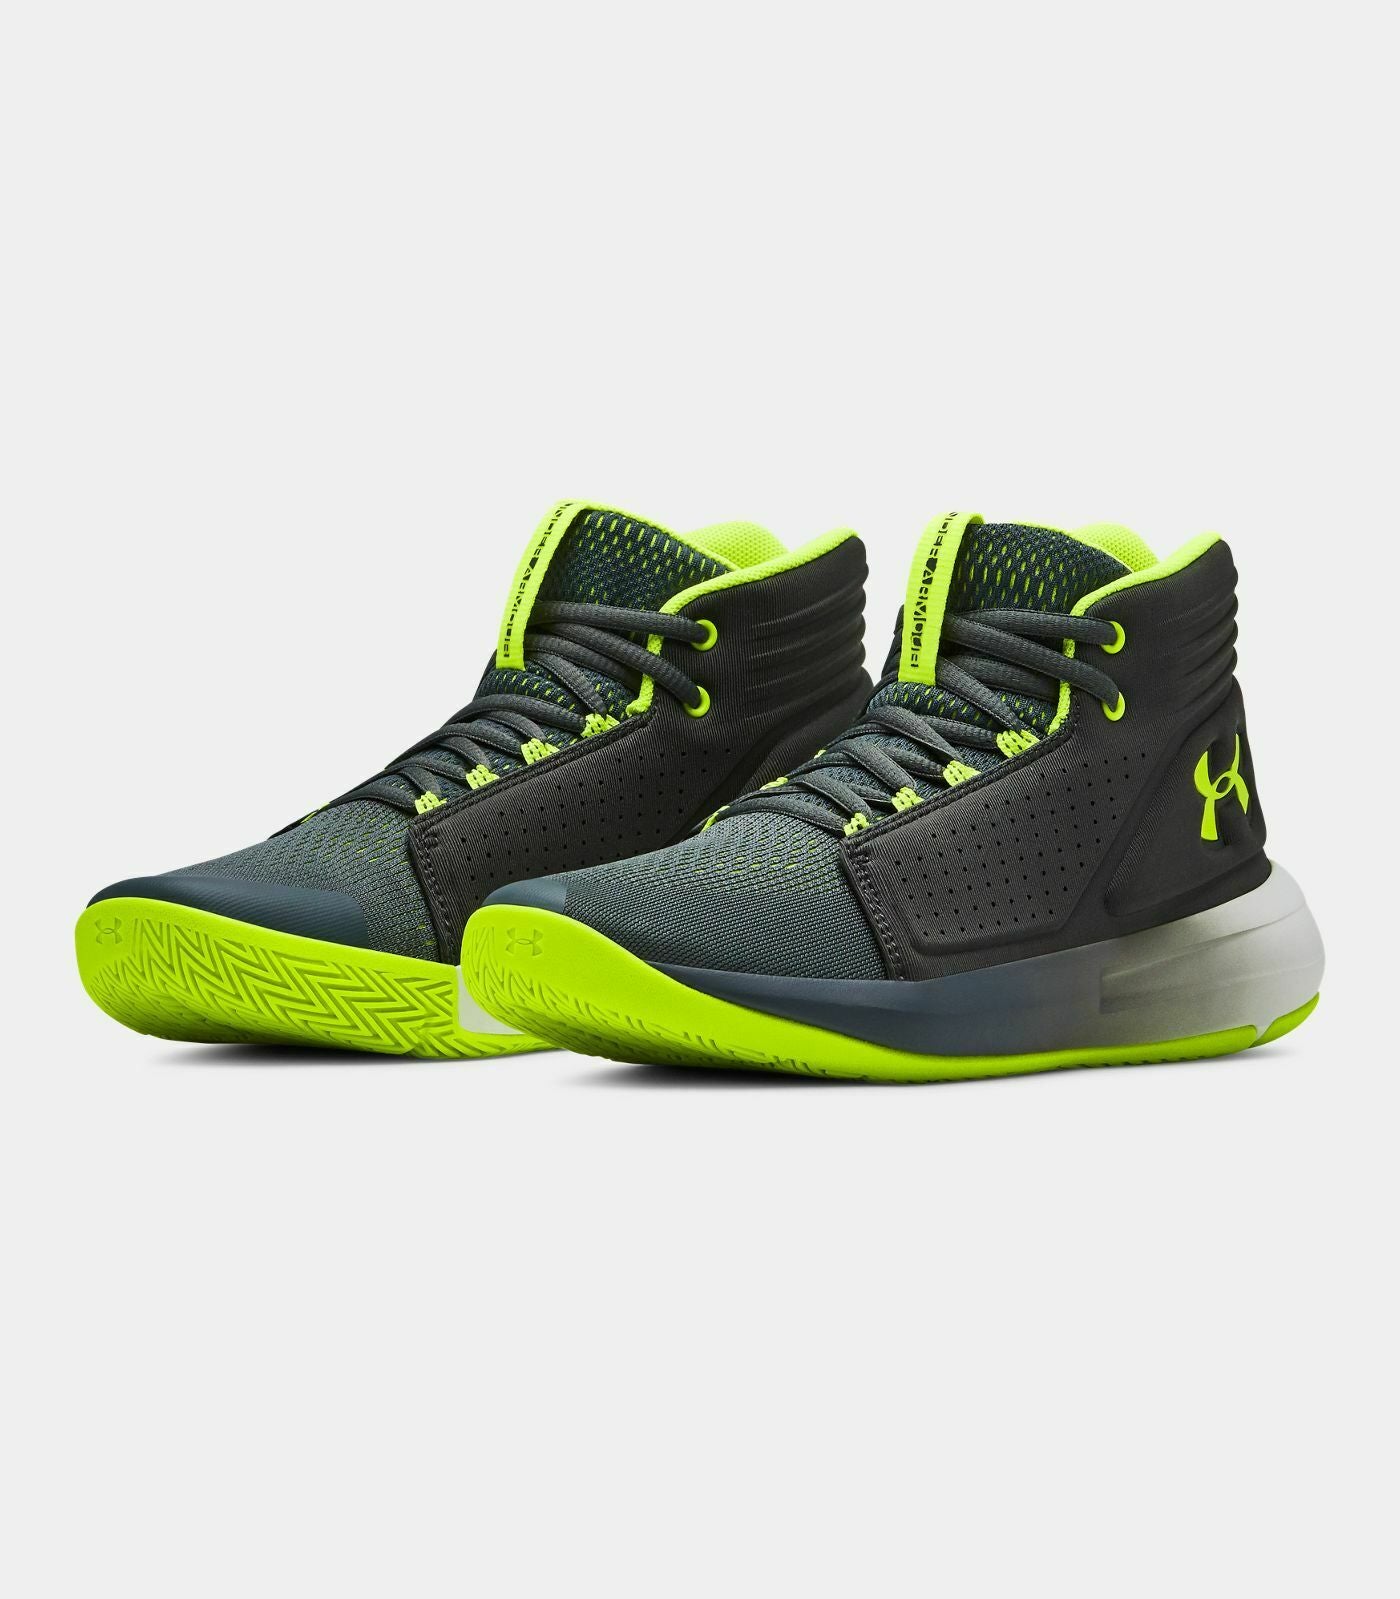 #UA Youth Bball GS Torch Mid - (3020428 103) - UAM - R2L12